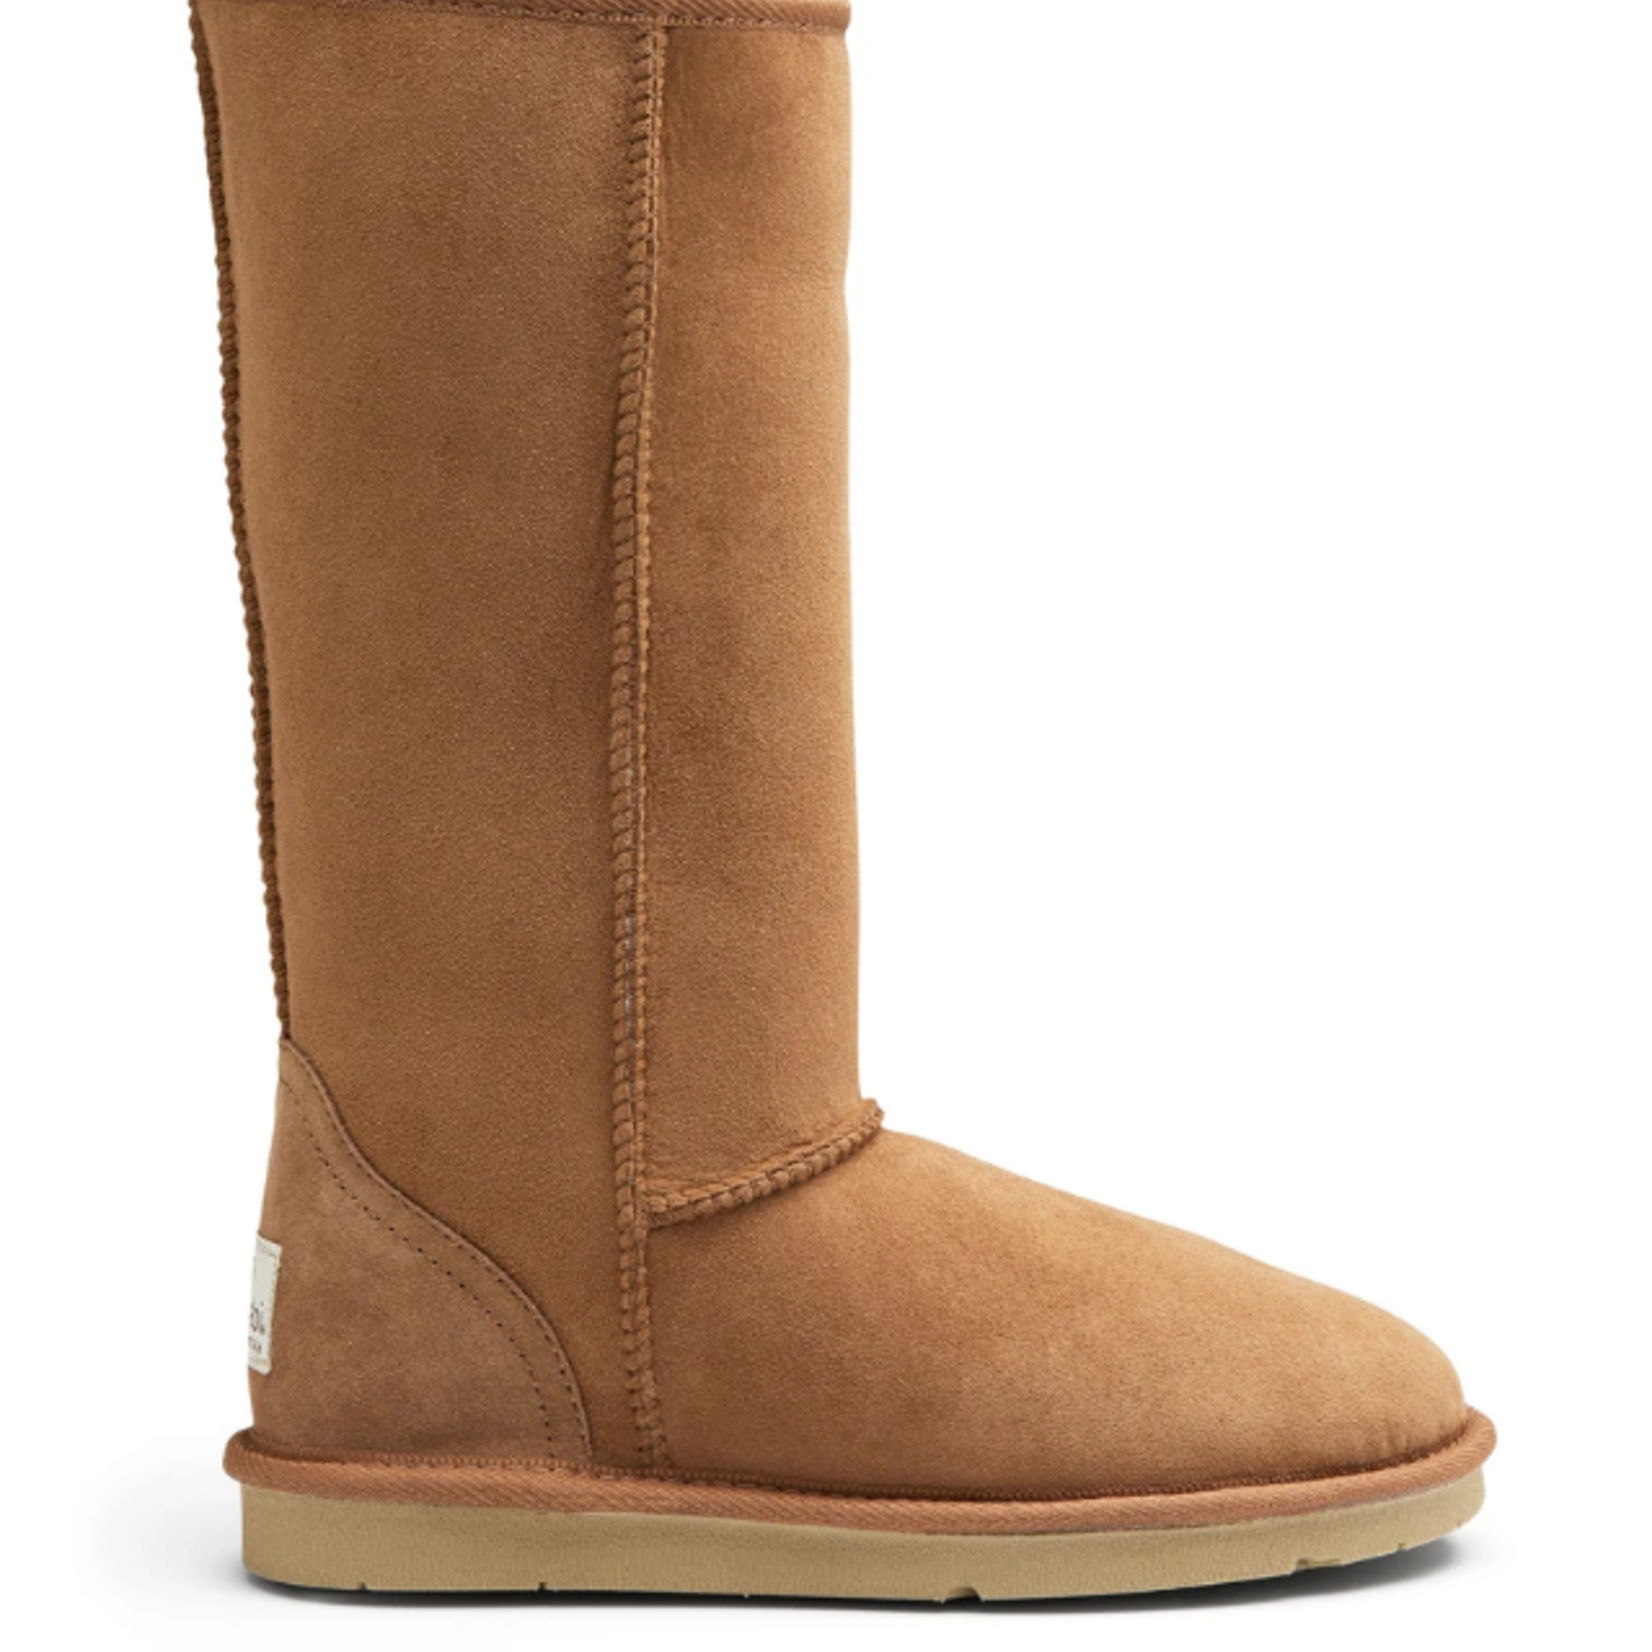 Ugg Boot Classic Tall Chestnut